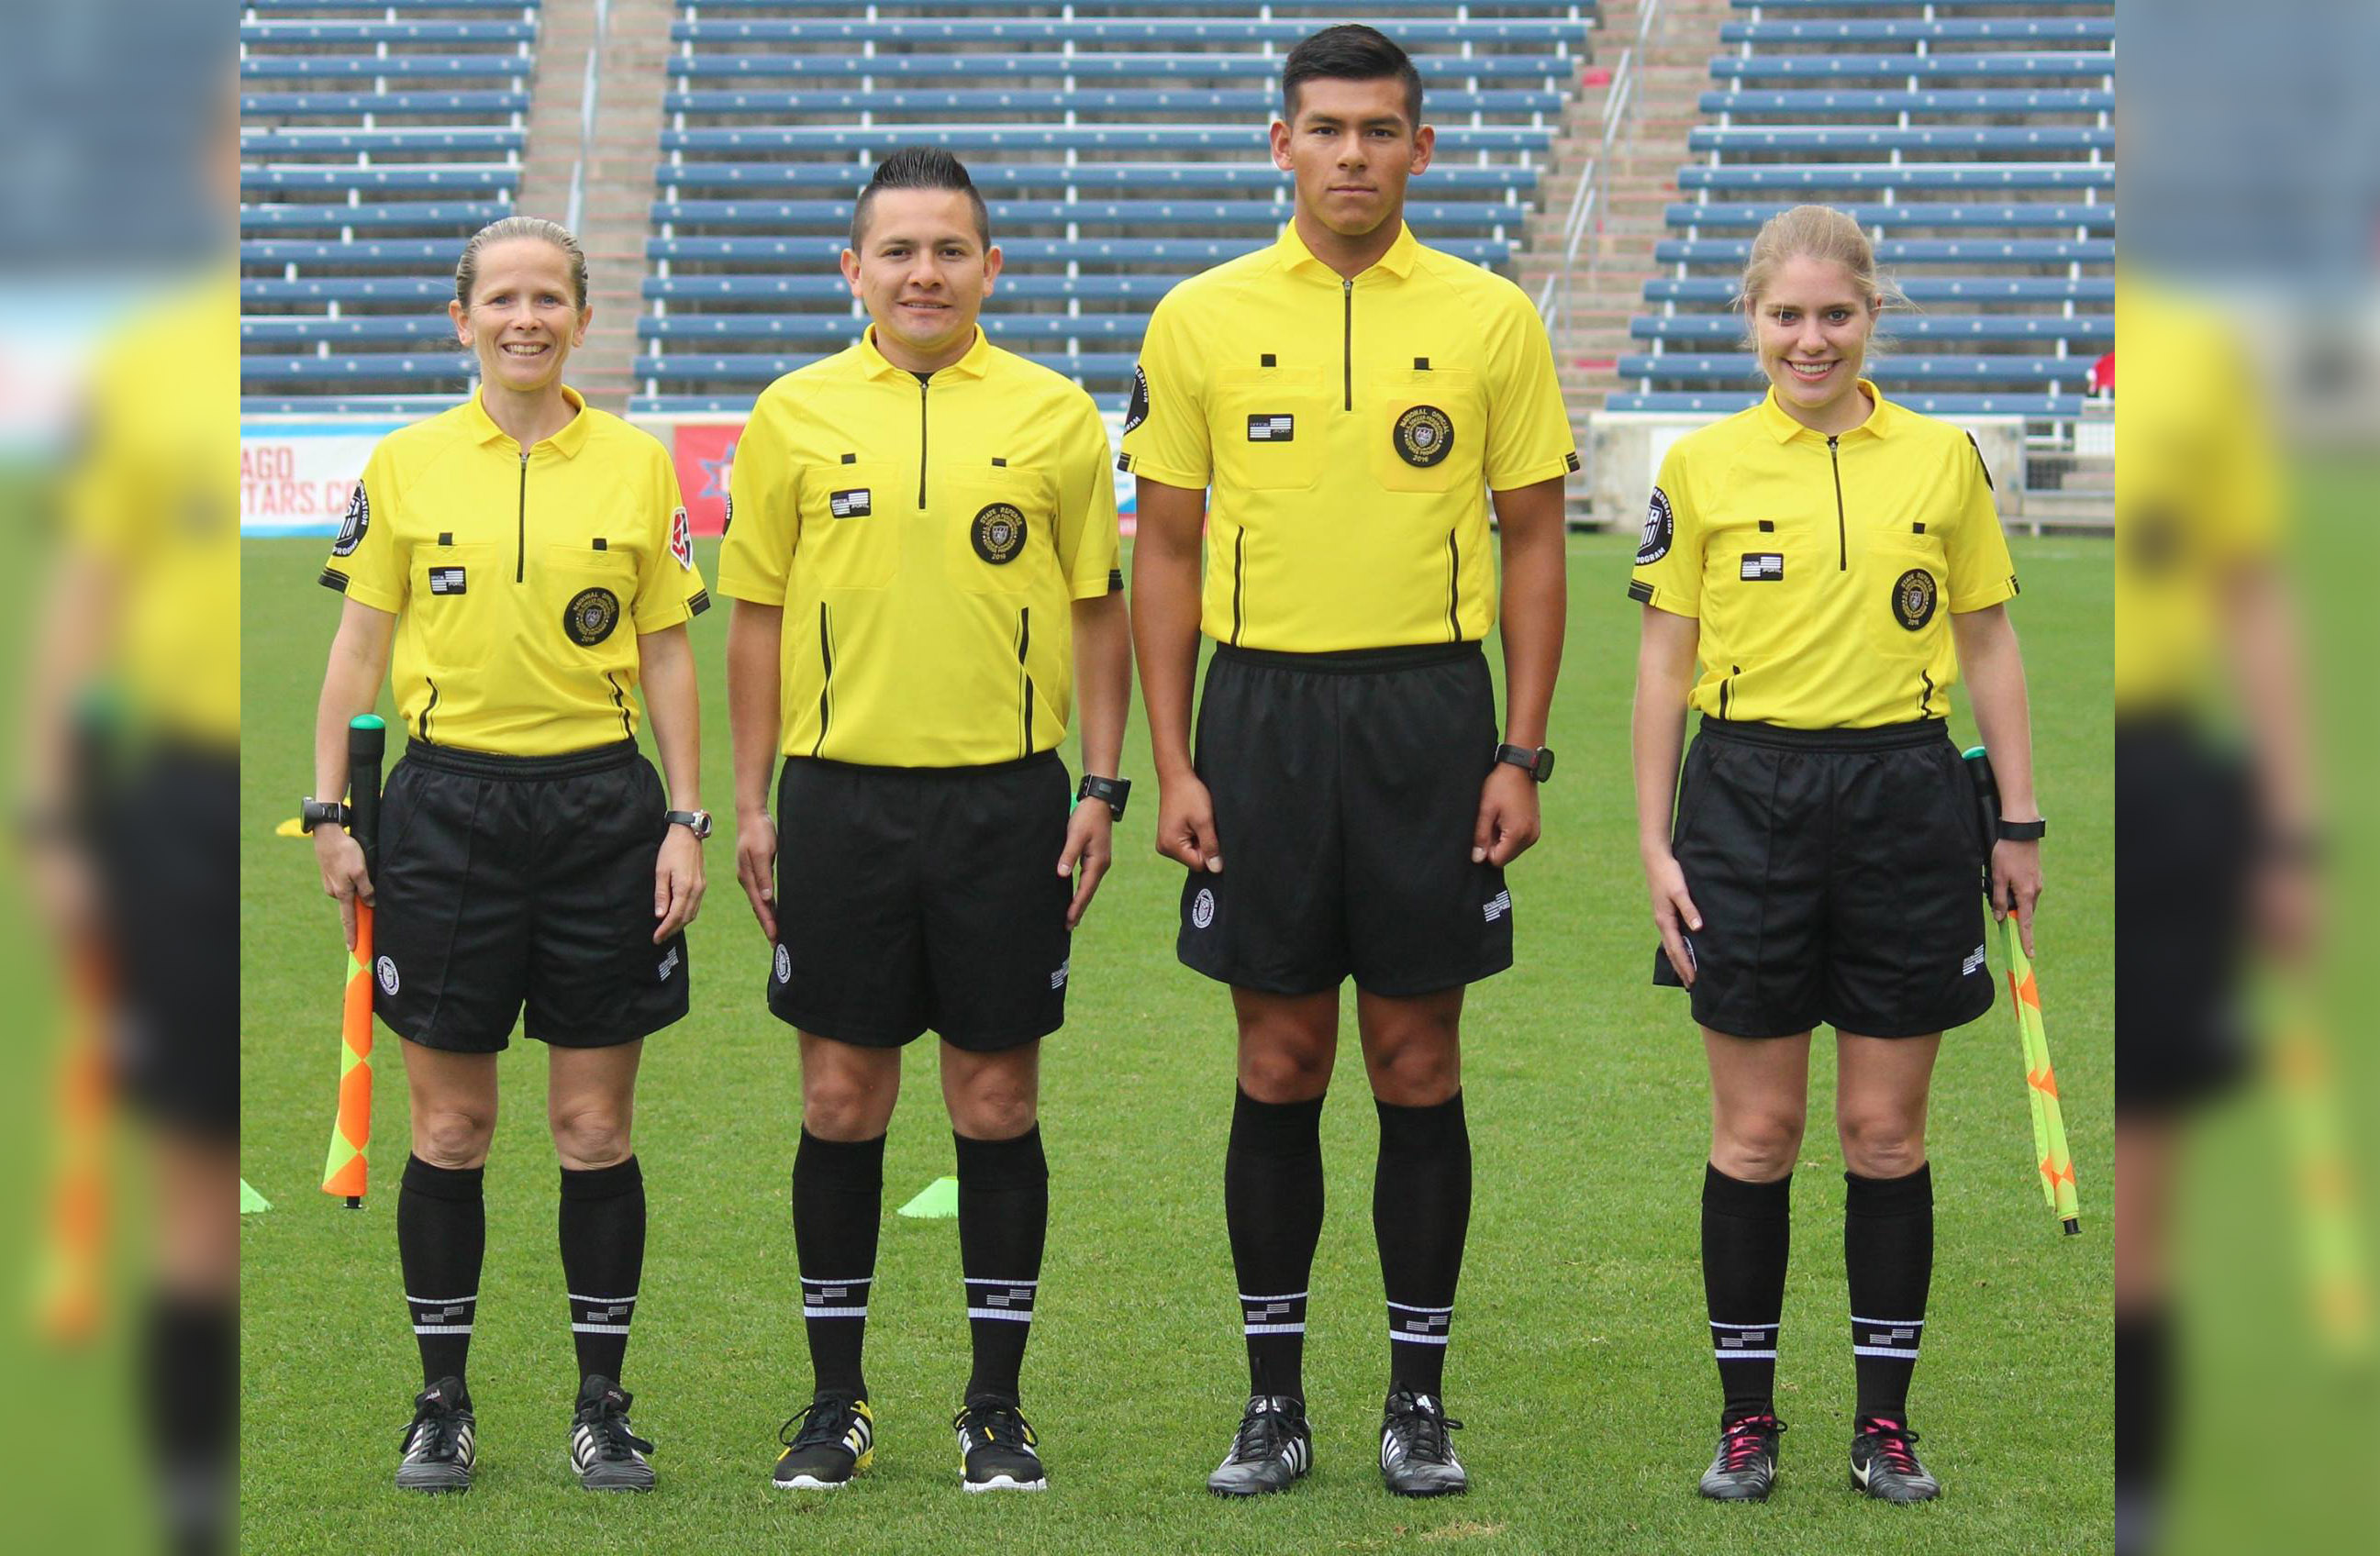 New Referee Uniforms from Official Sports CNRA